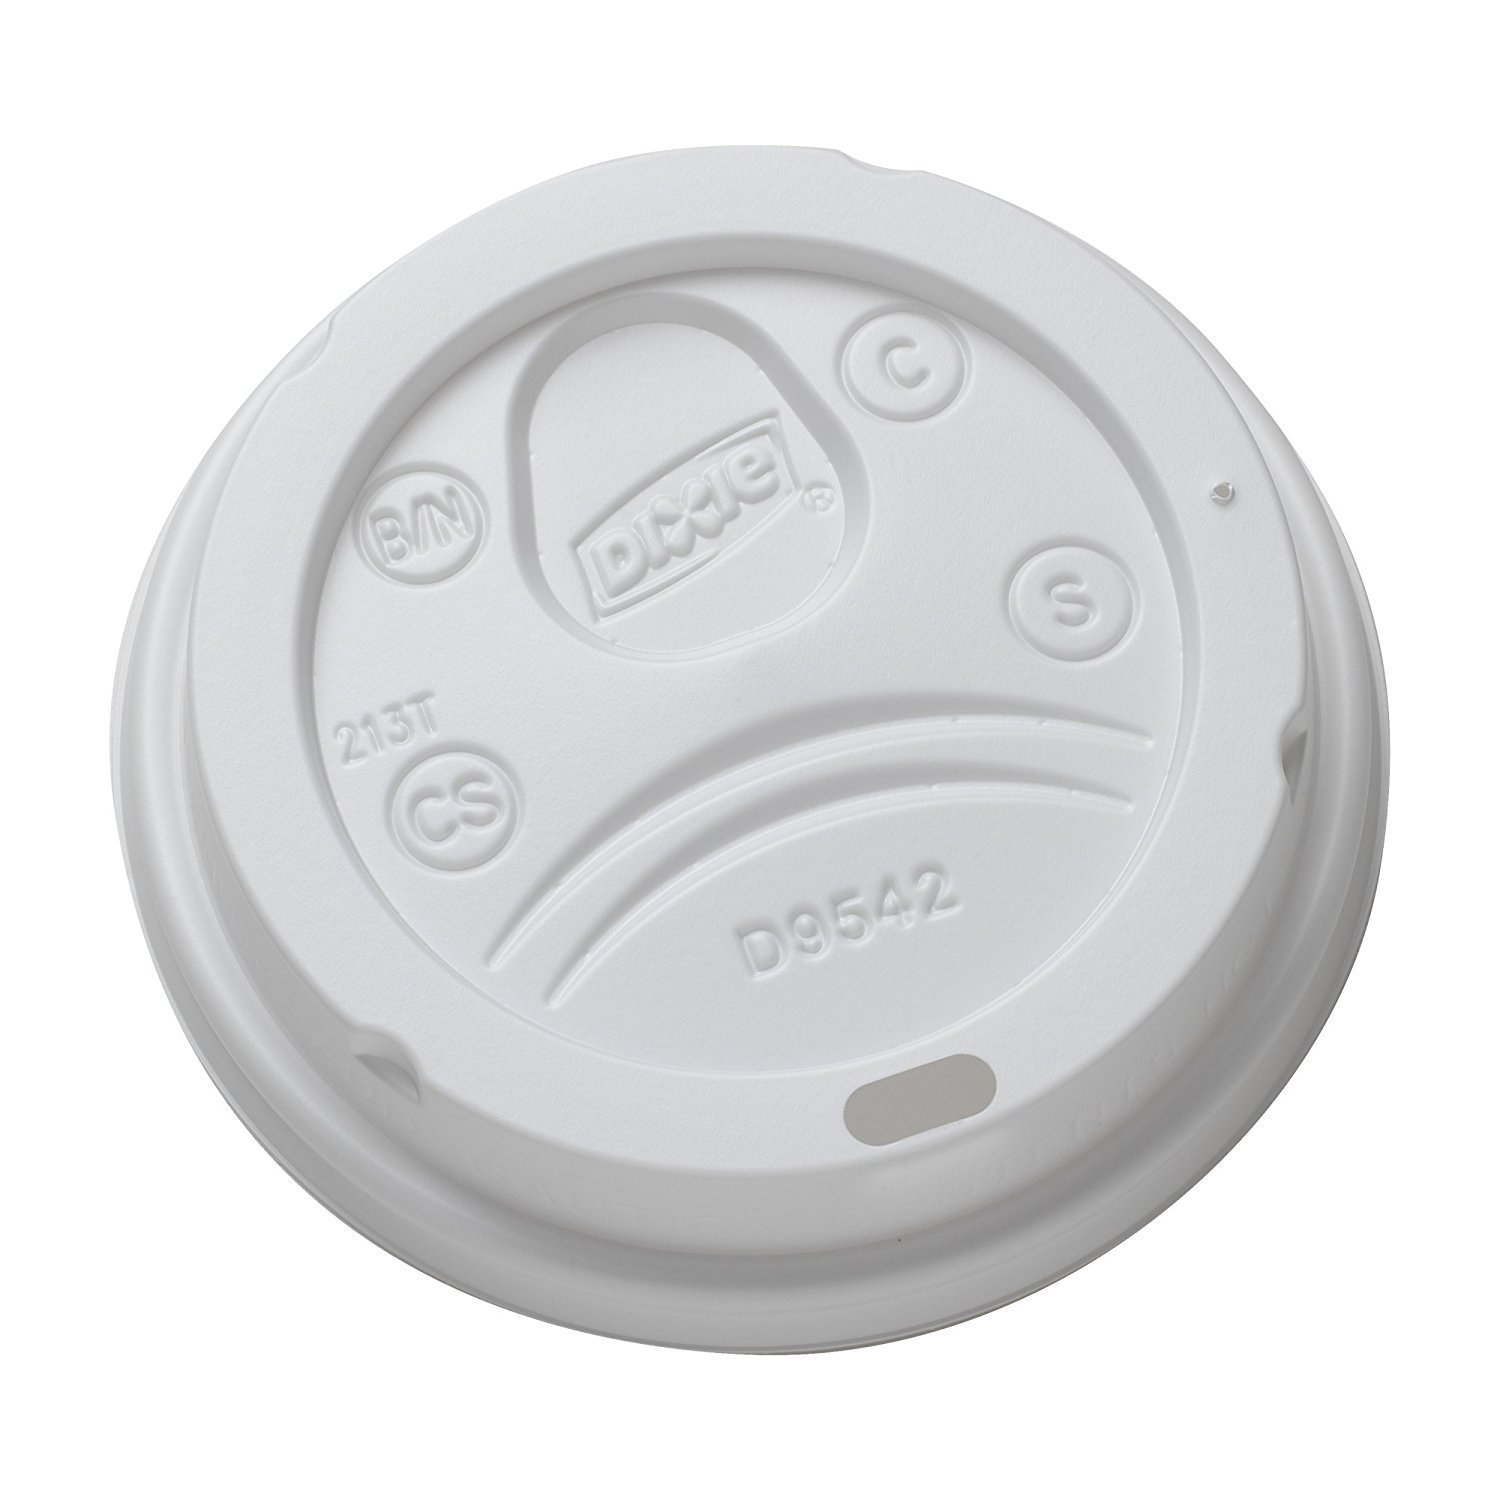 Dixie D9542W Dome Lid for 10-16 Ounce PerfecTouch Cups and 12-20 Ounce Paper Hot Cups, White 100 Lids